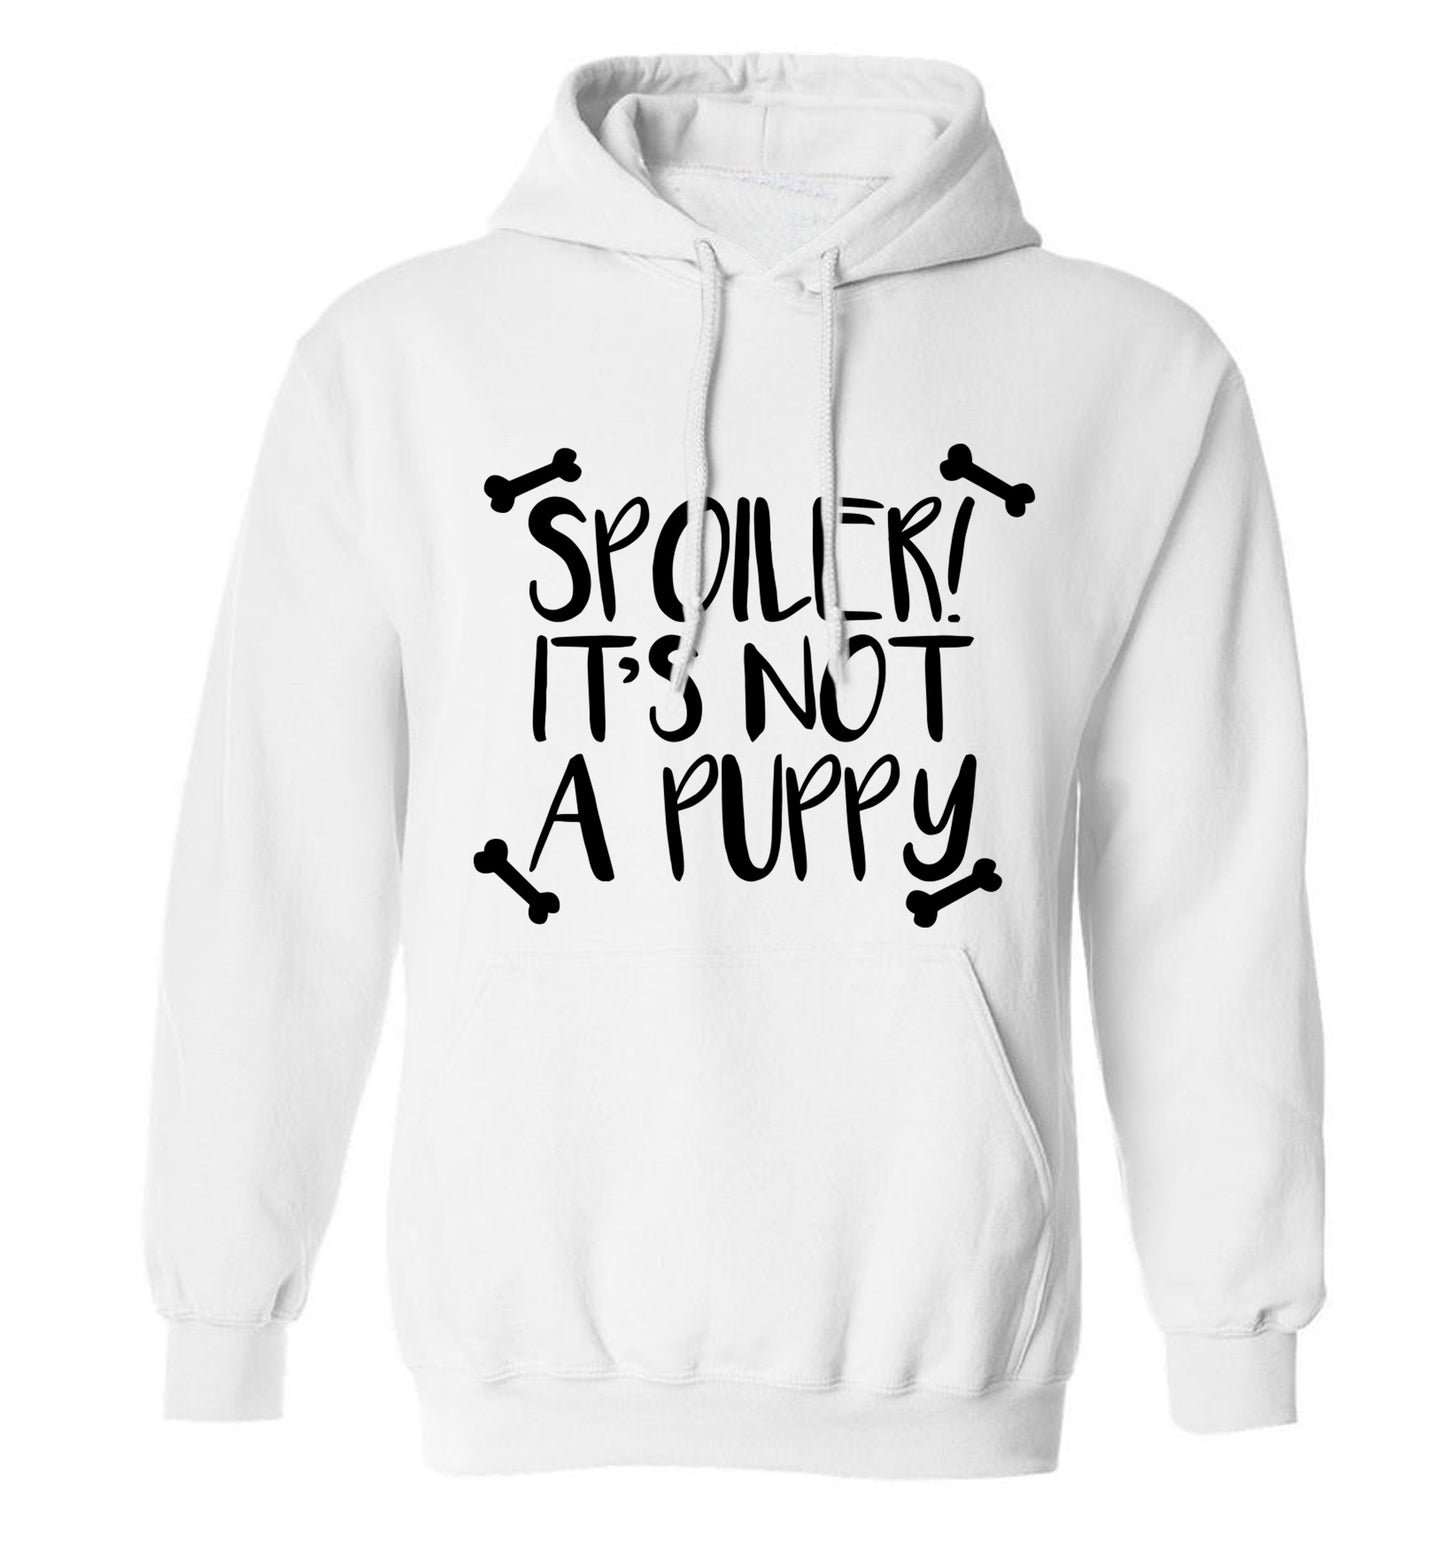 Spoiler it's not a puppy adults unisex white hoodie 2XL